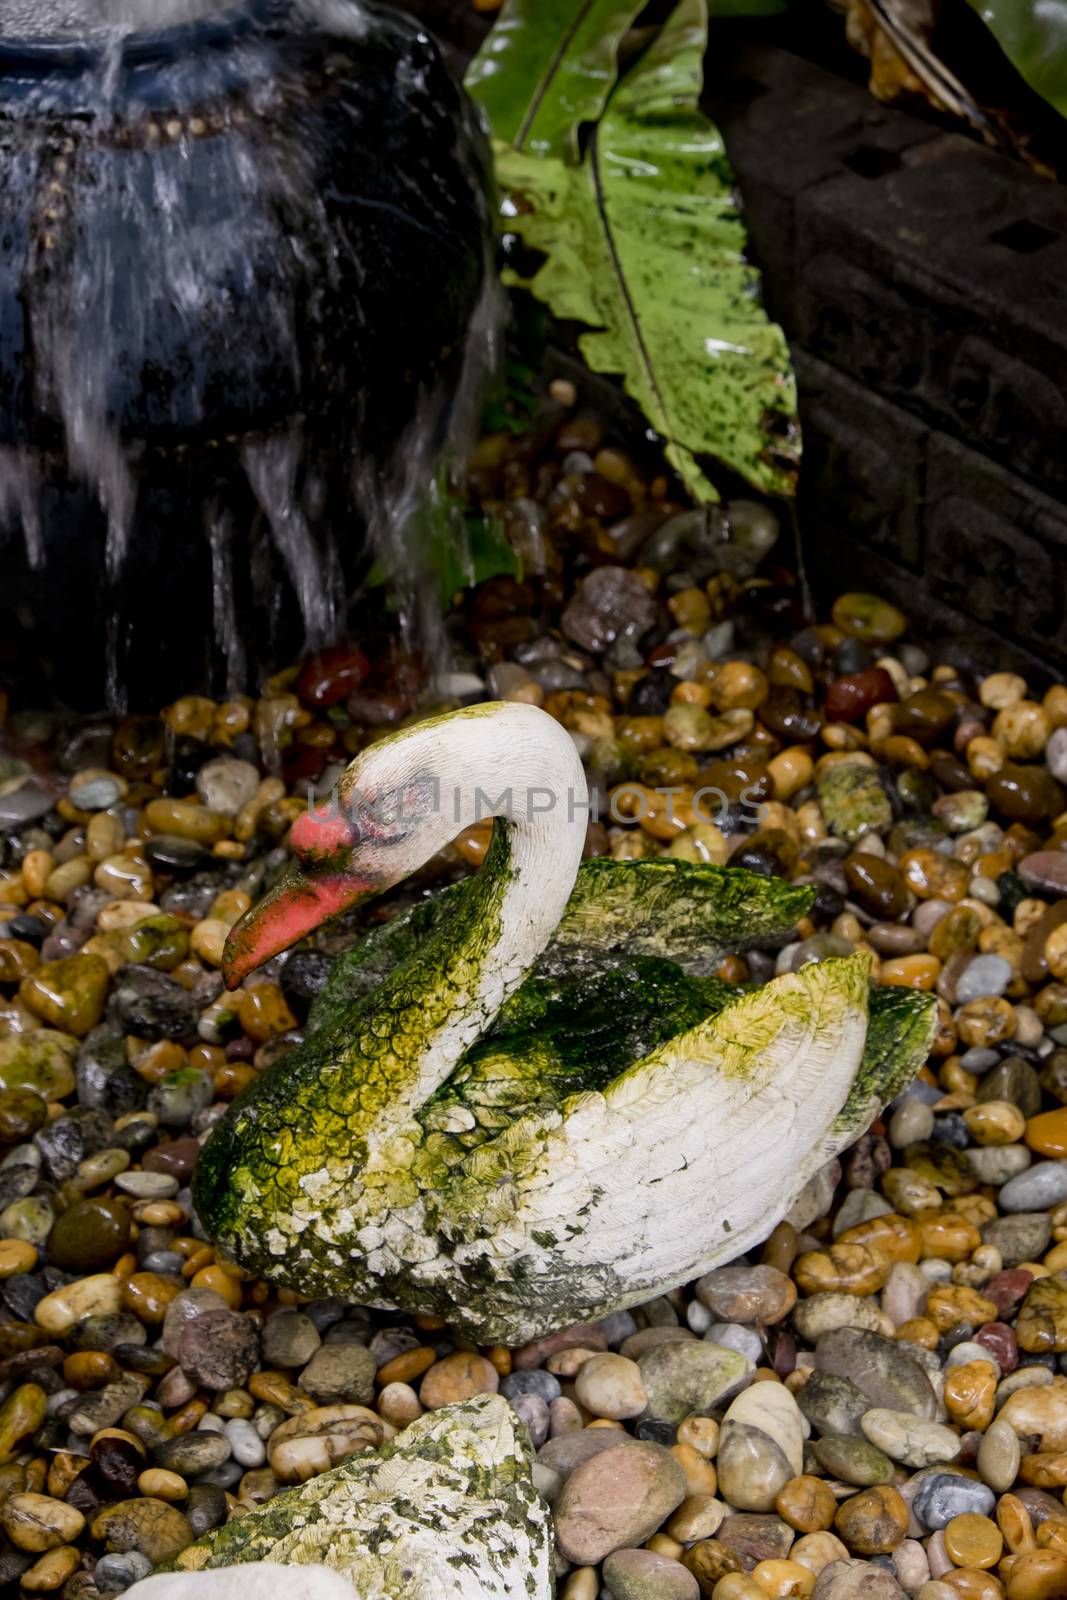 Swan statue with moss